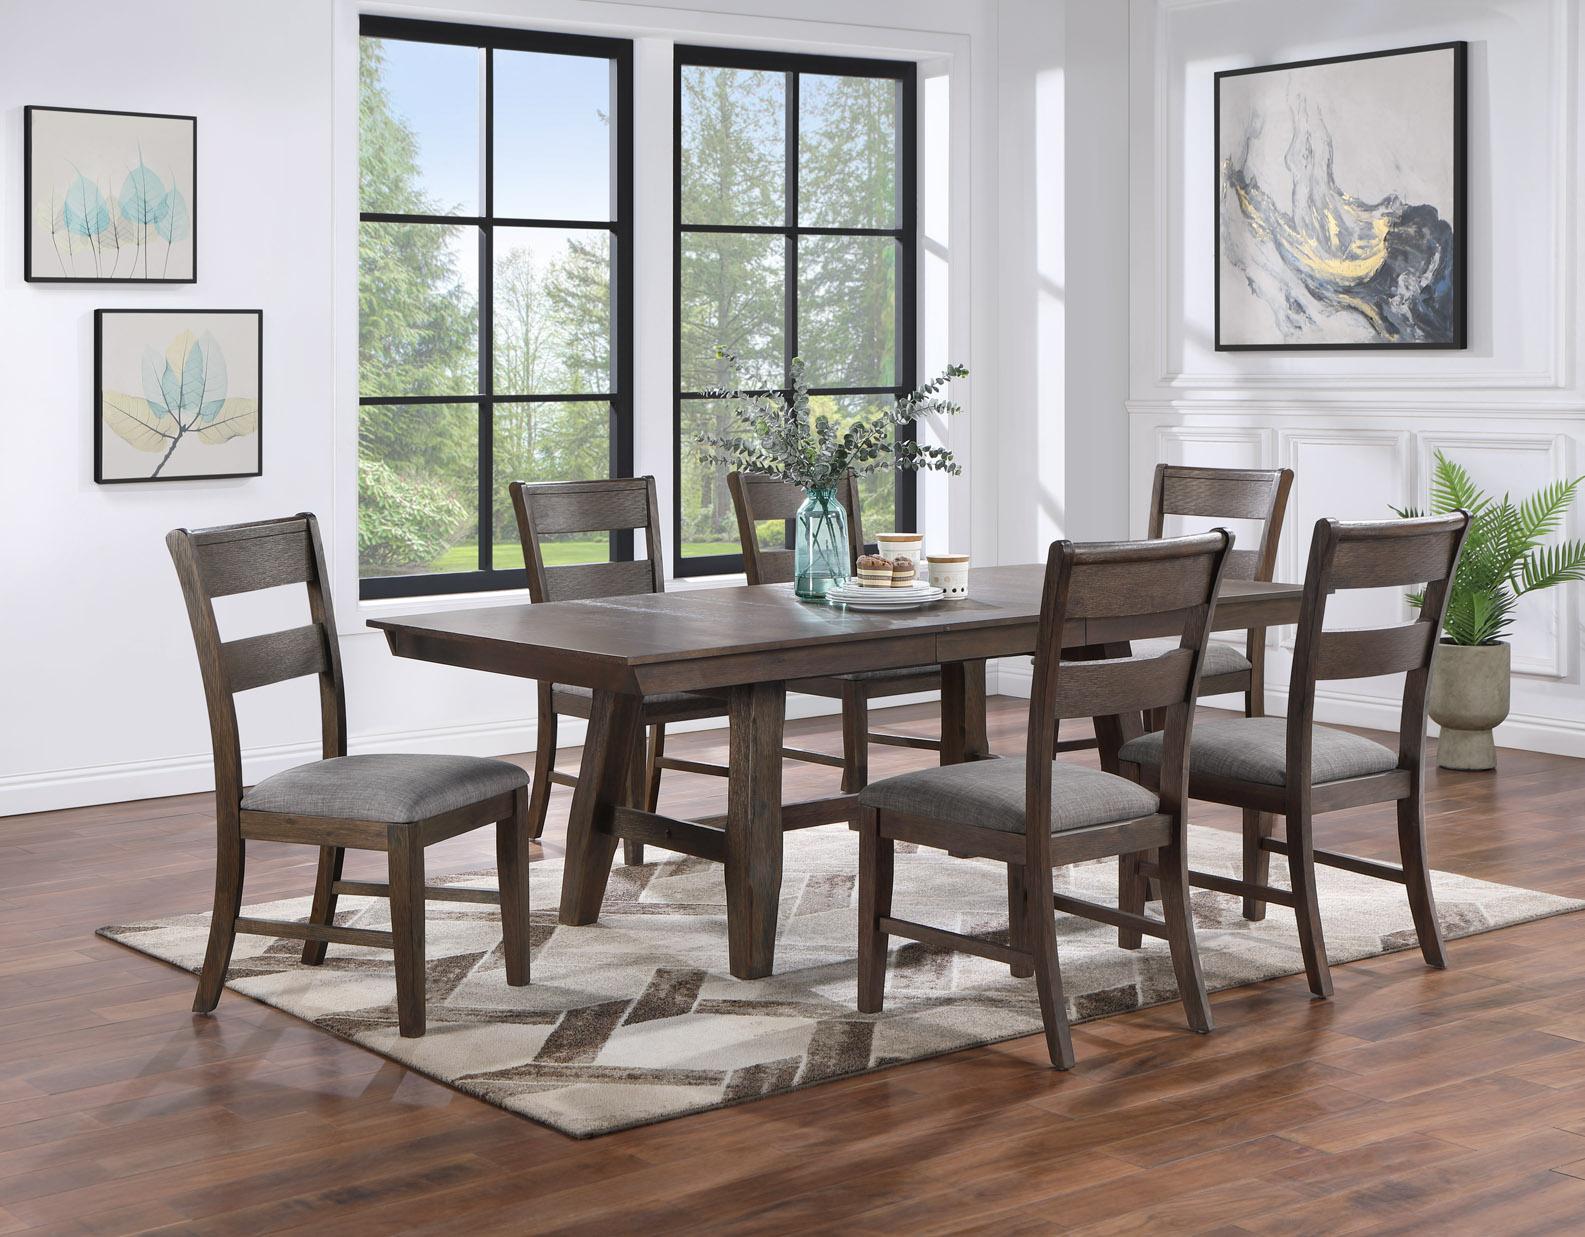 Wood Dining Table with Leaf and 6 chairs